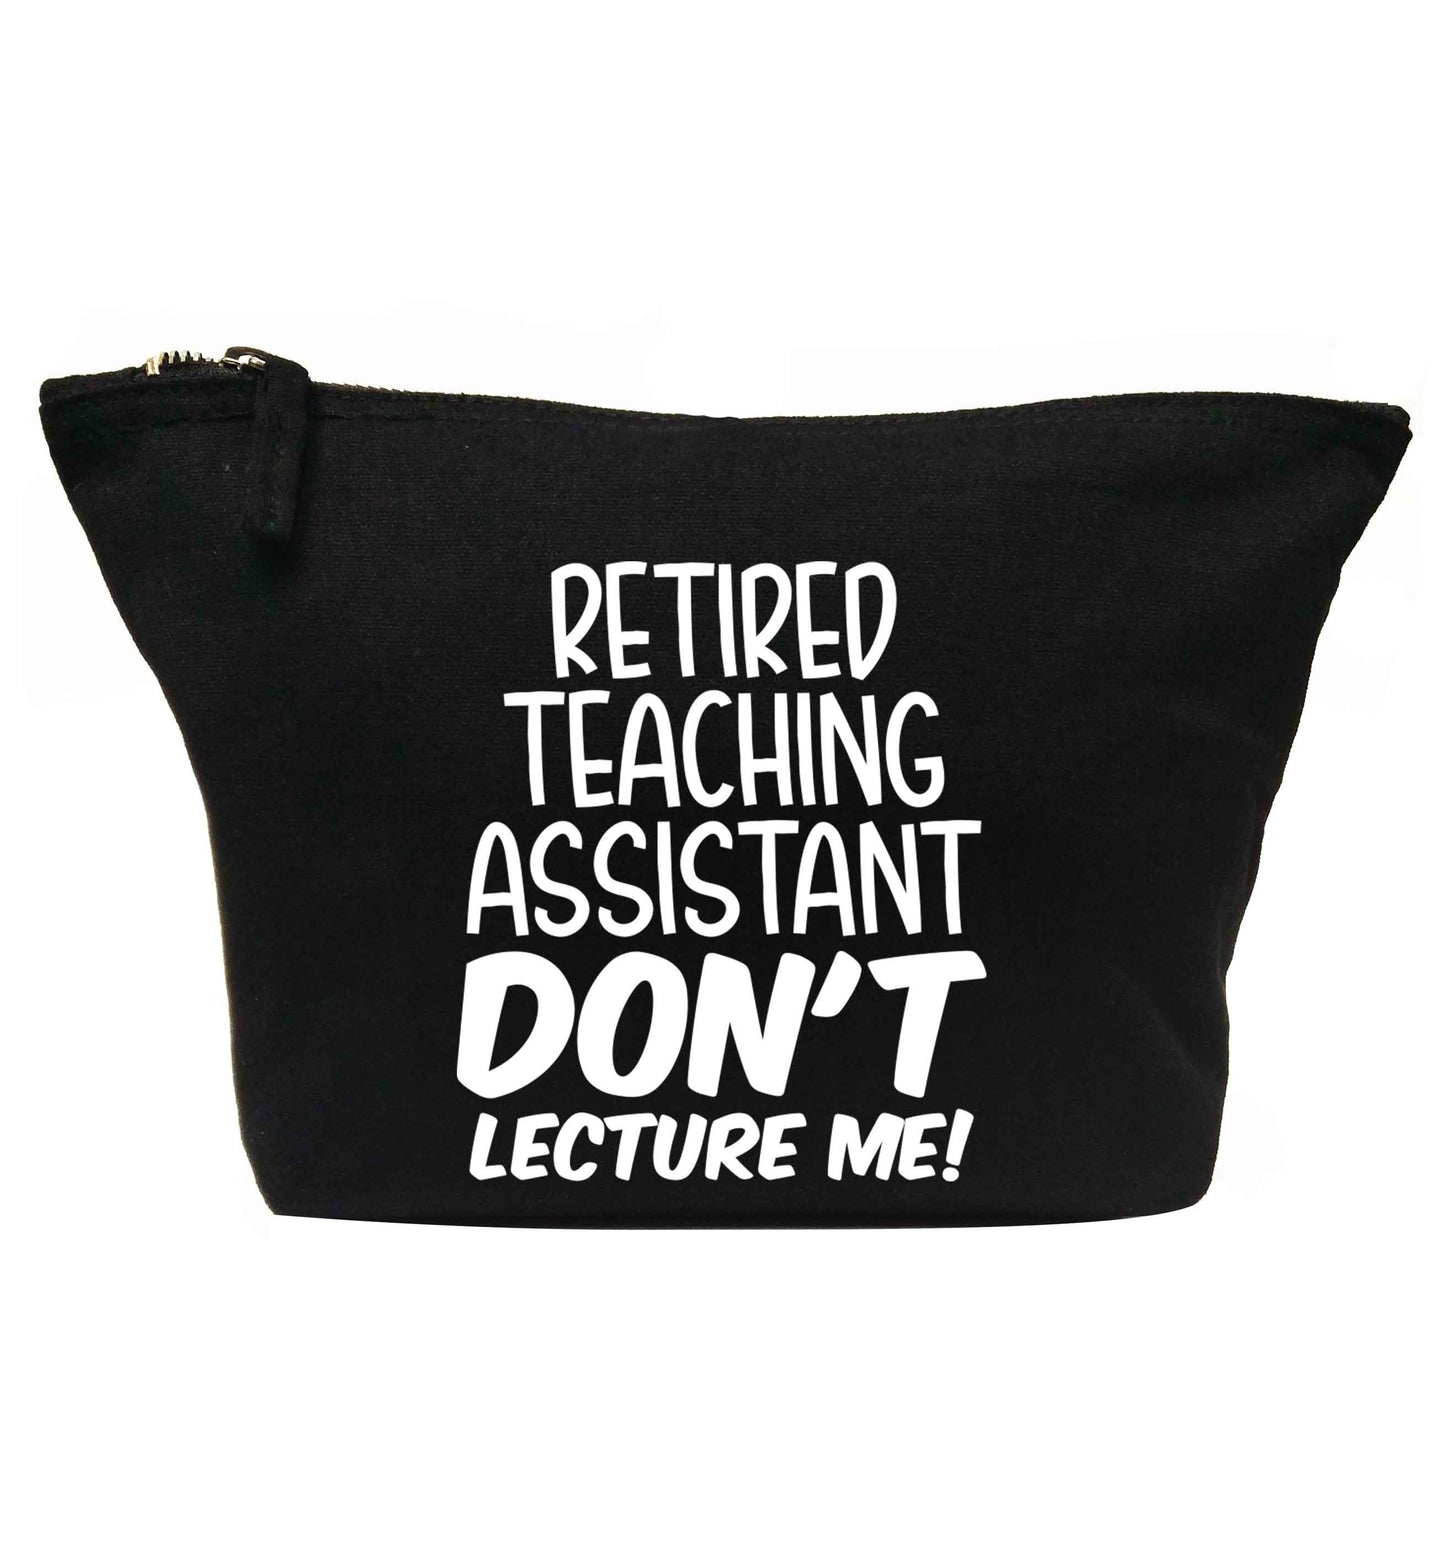 Retired teaching assistant don't lecture me | makeup / wash bag